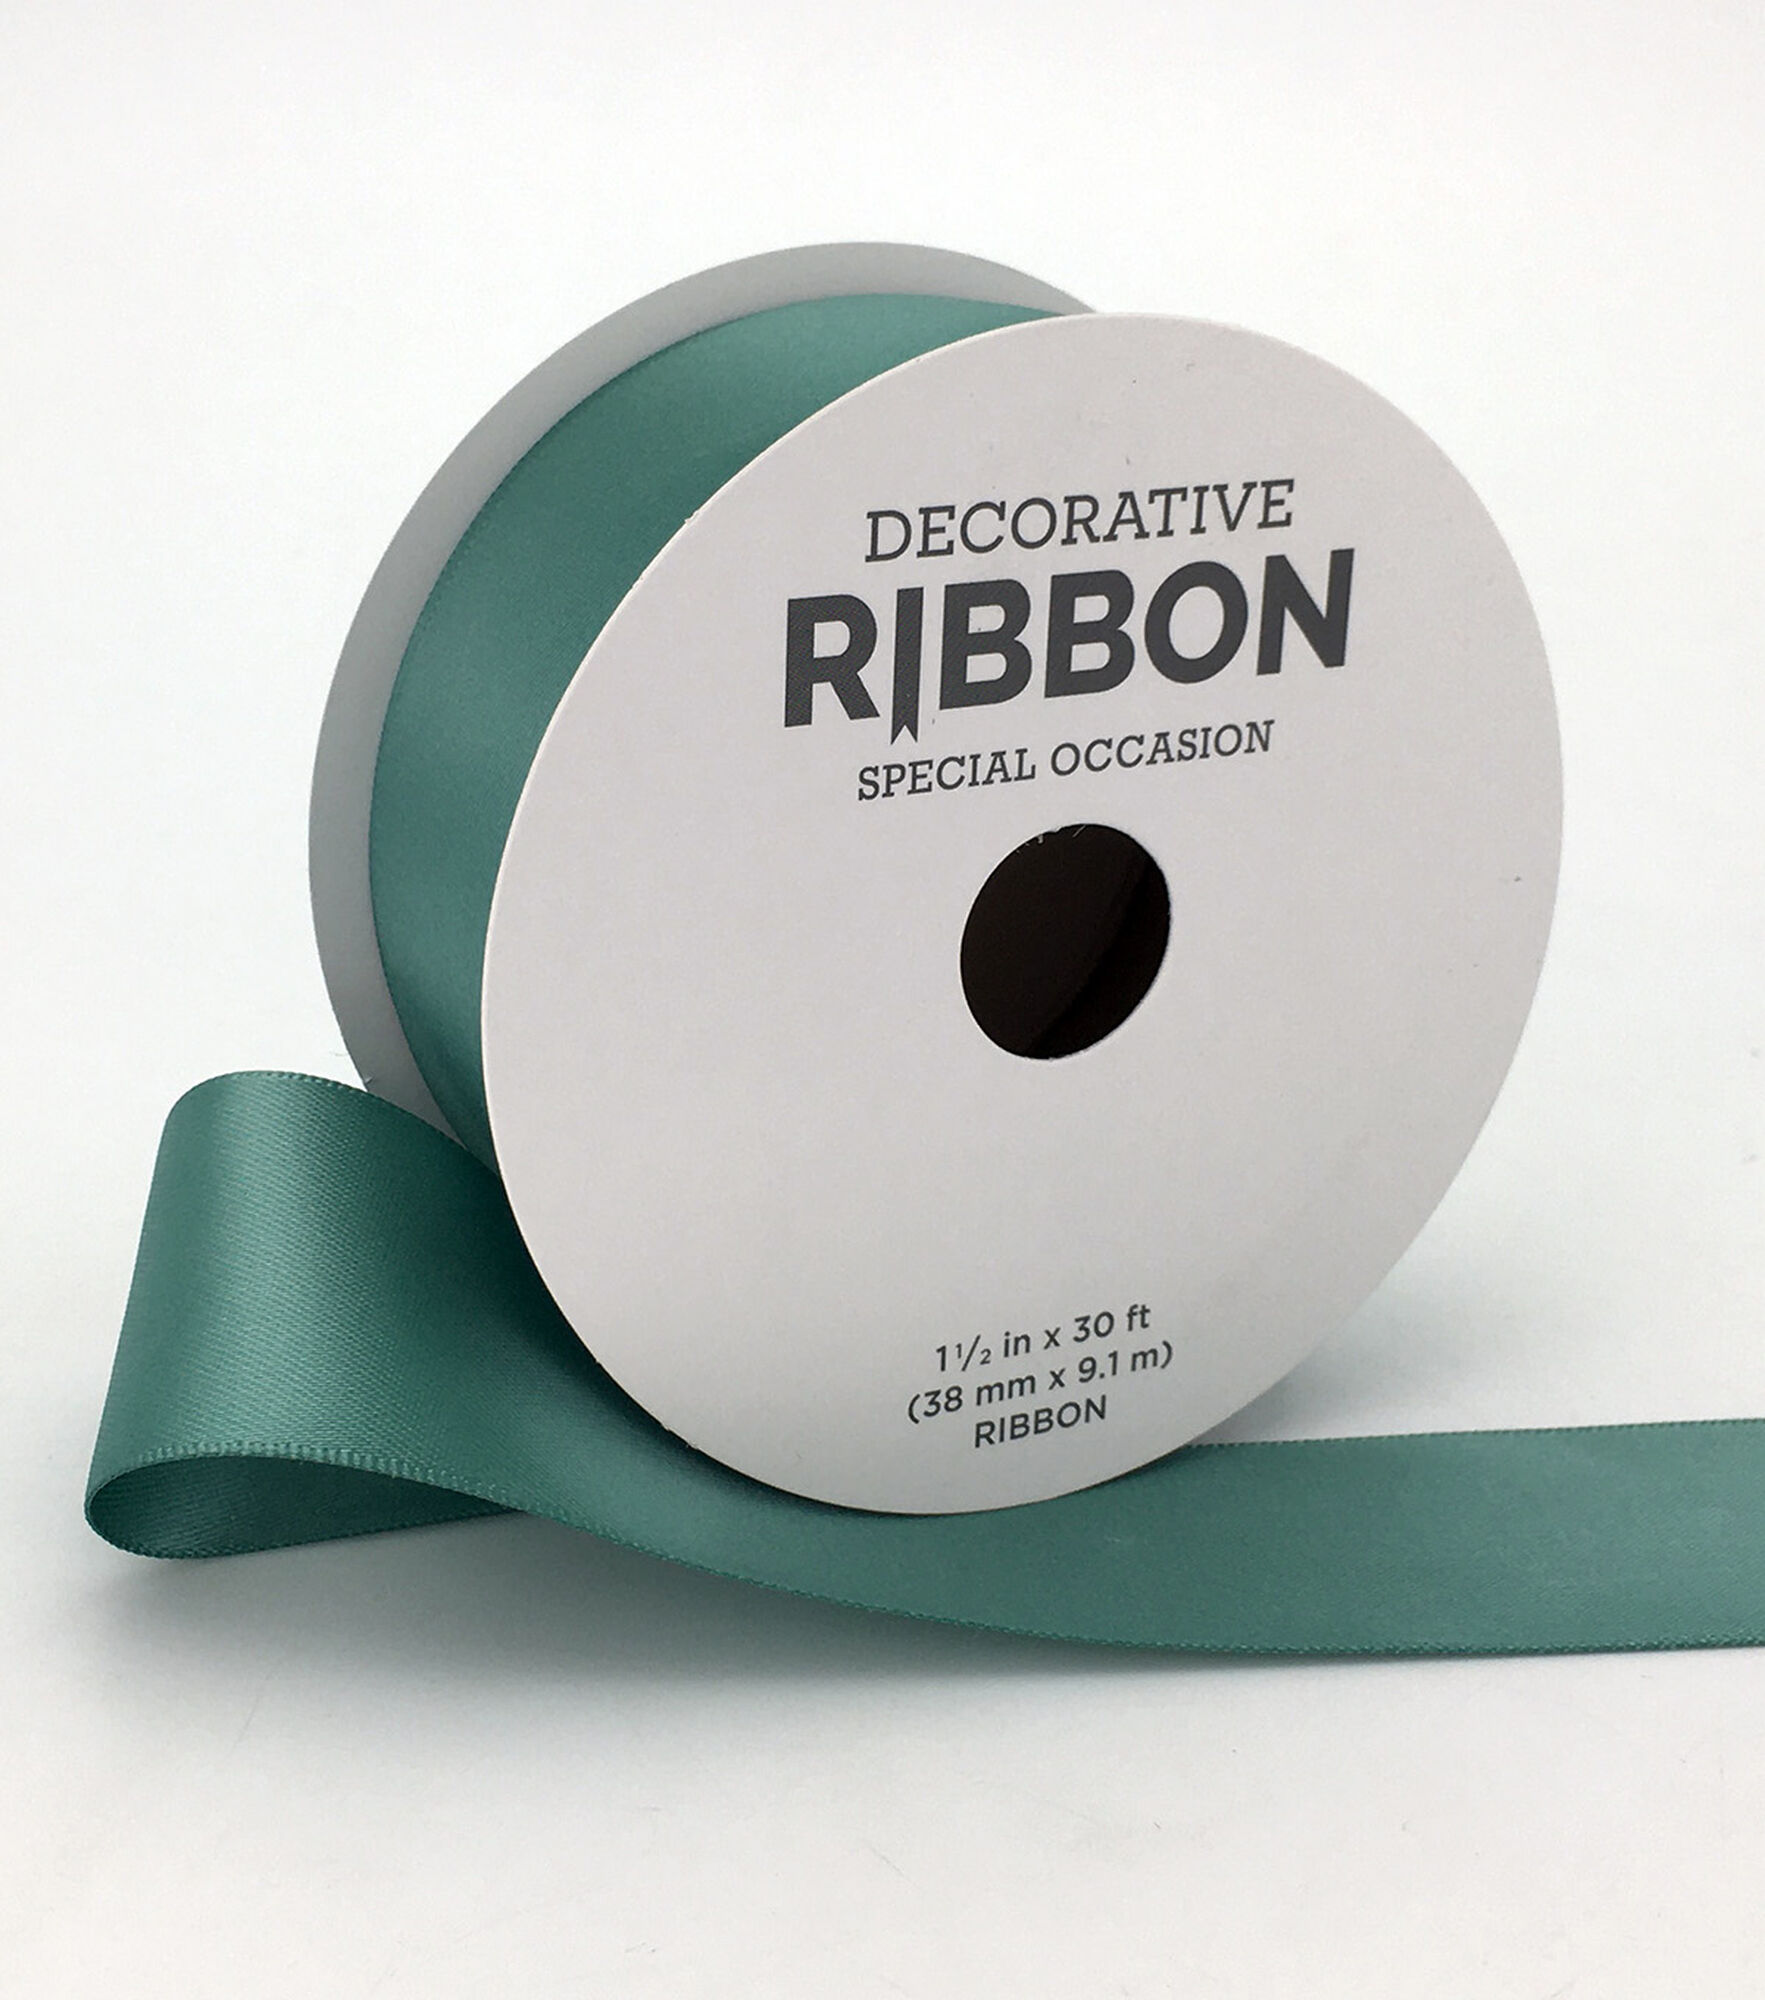 4 Ways You Can Use a Satin Ribbon for Different Art & Craft Ideas and